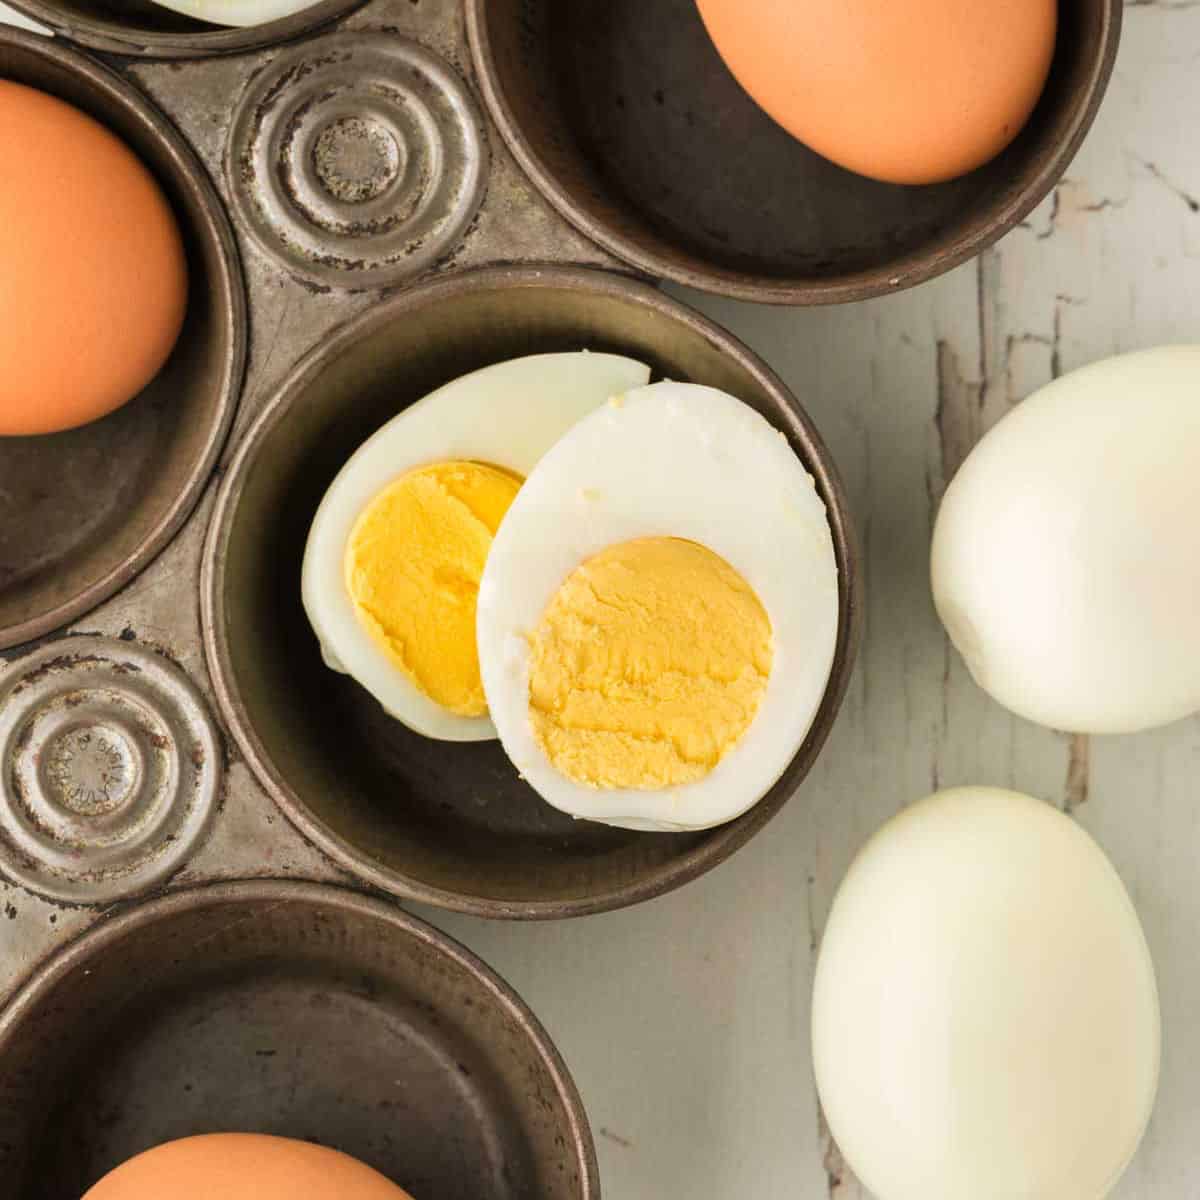 How to Cook Eggs in the Oven